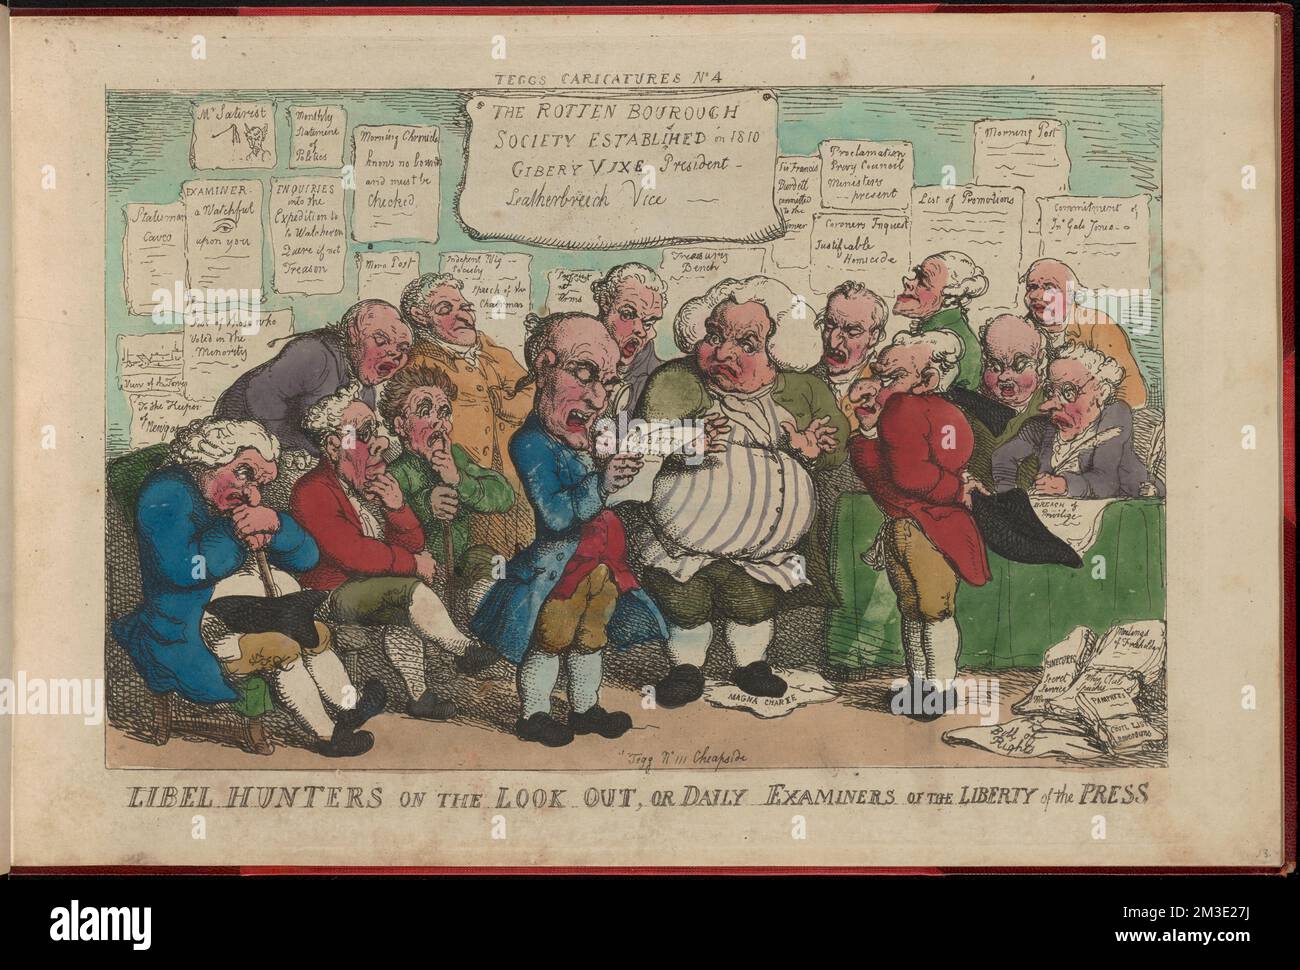 Libel hunters on the look out : Or daily examiners of the liberty of the press , Organizations, Libel & slander. Thomas Rowlandson (1756-1827). Prints and Drawings Stock Photo